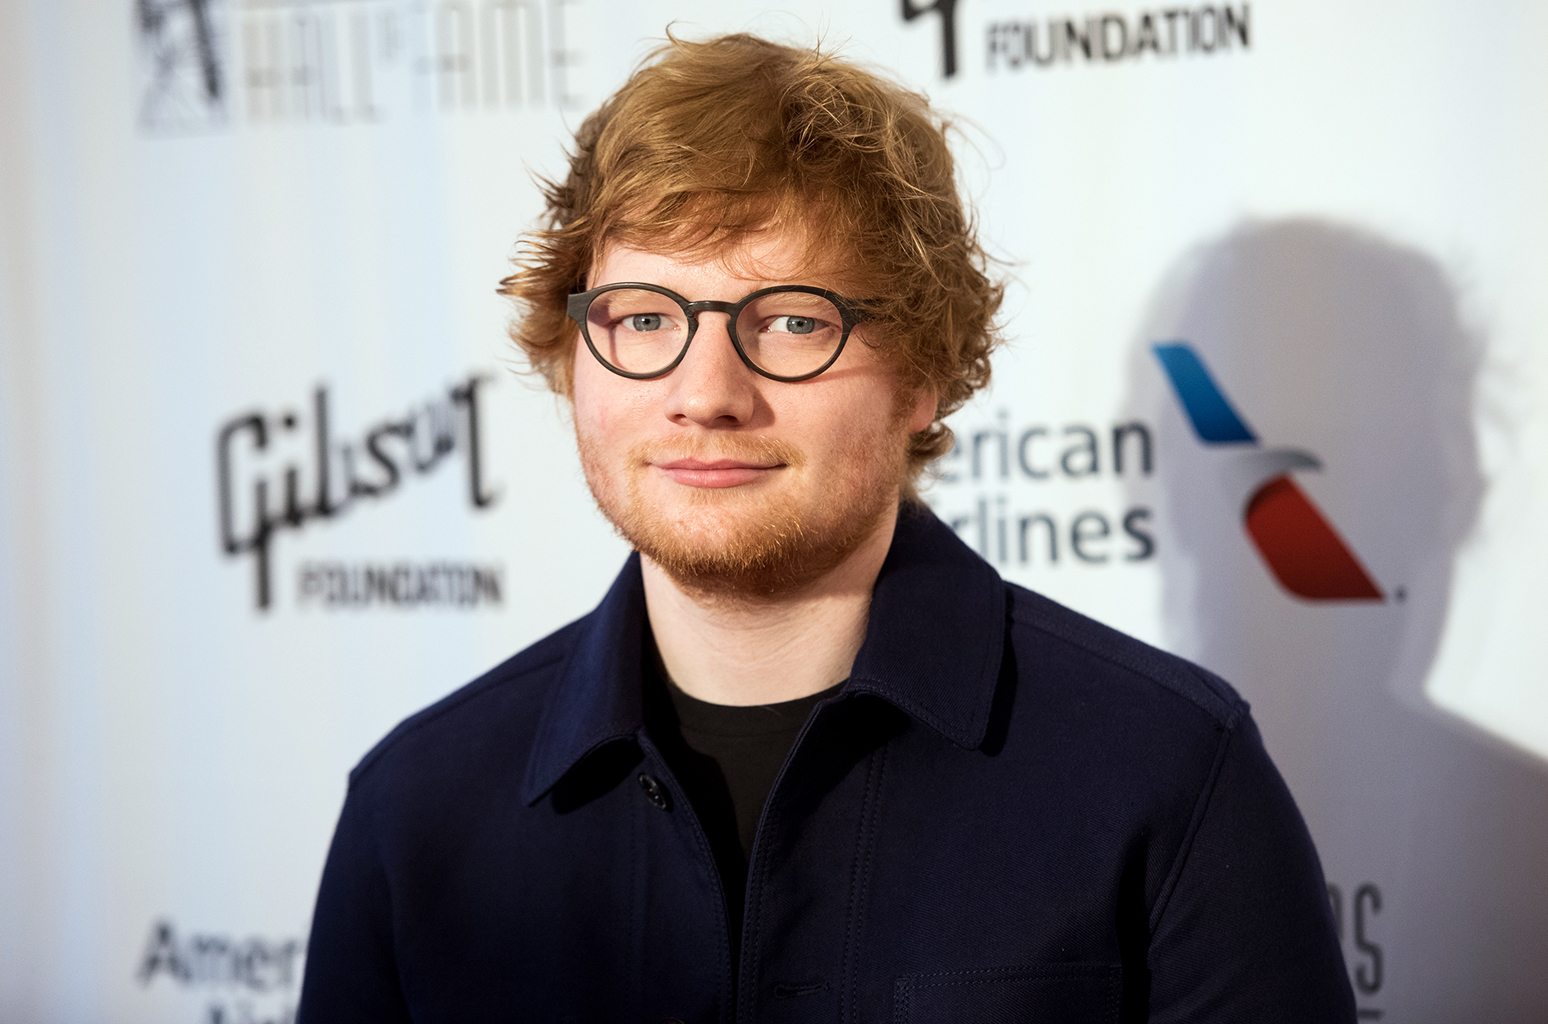 NEW YORK, NY - JUNE 15: Singer Ed Sheeran attends the 48th Annual Songwriters Hall Of Fame Induction and Awards Gala at New York Marriott Marquis Hotel on June 15, 2017 in New York City. (Photo by Noam Galai/WireImage)